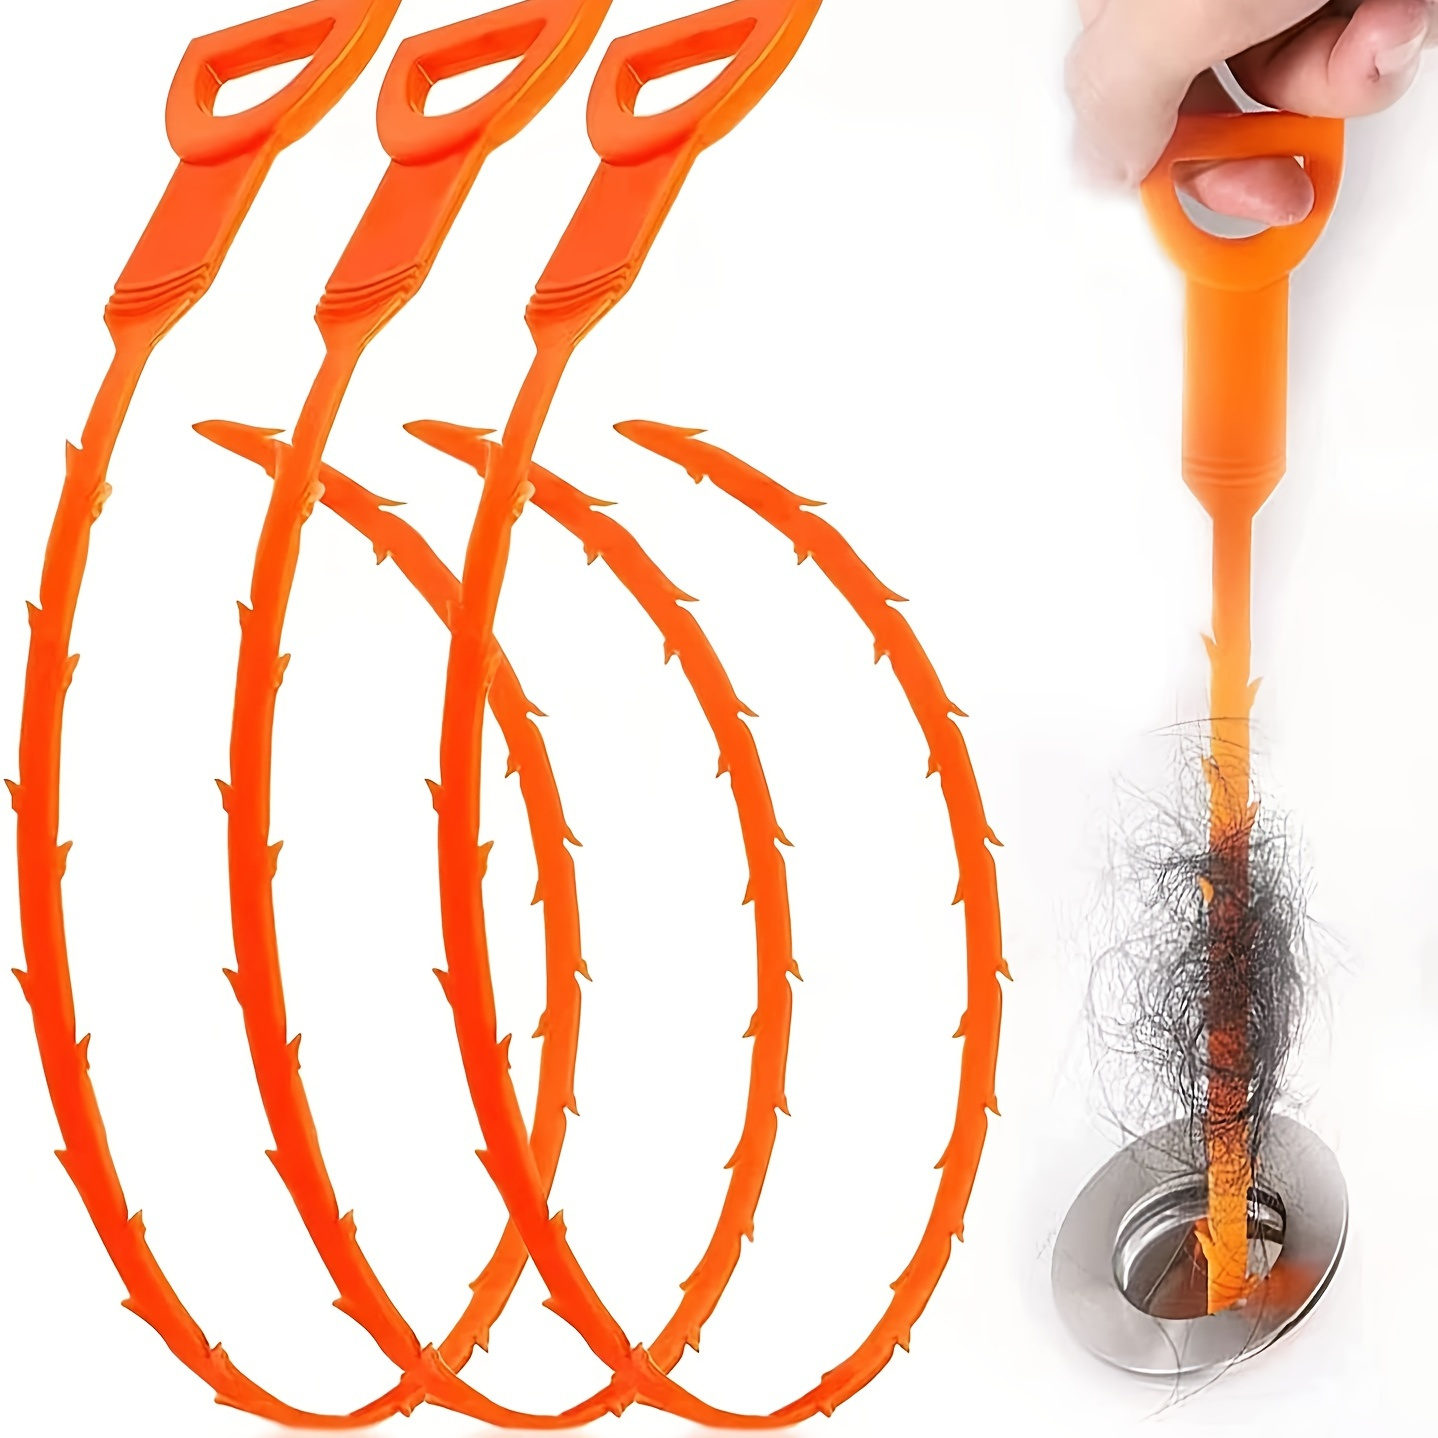 3 Pack 20 Inch Hair Snake Tool Drain Opener Hair Tub Toilet Clogged Drains  Relief Cleaning Tool